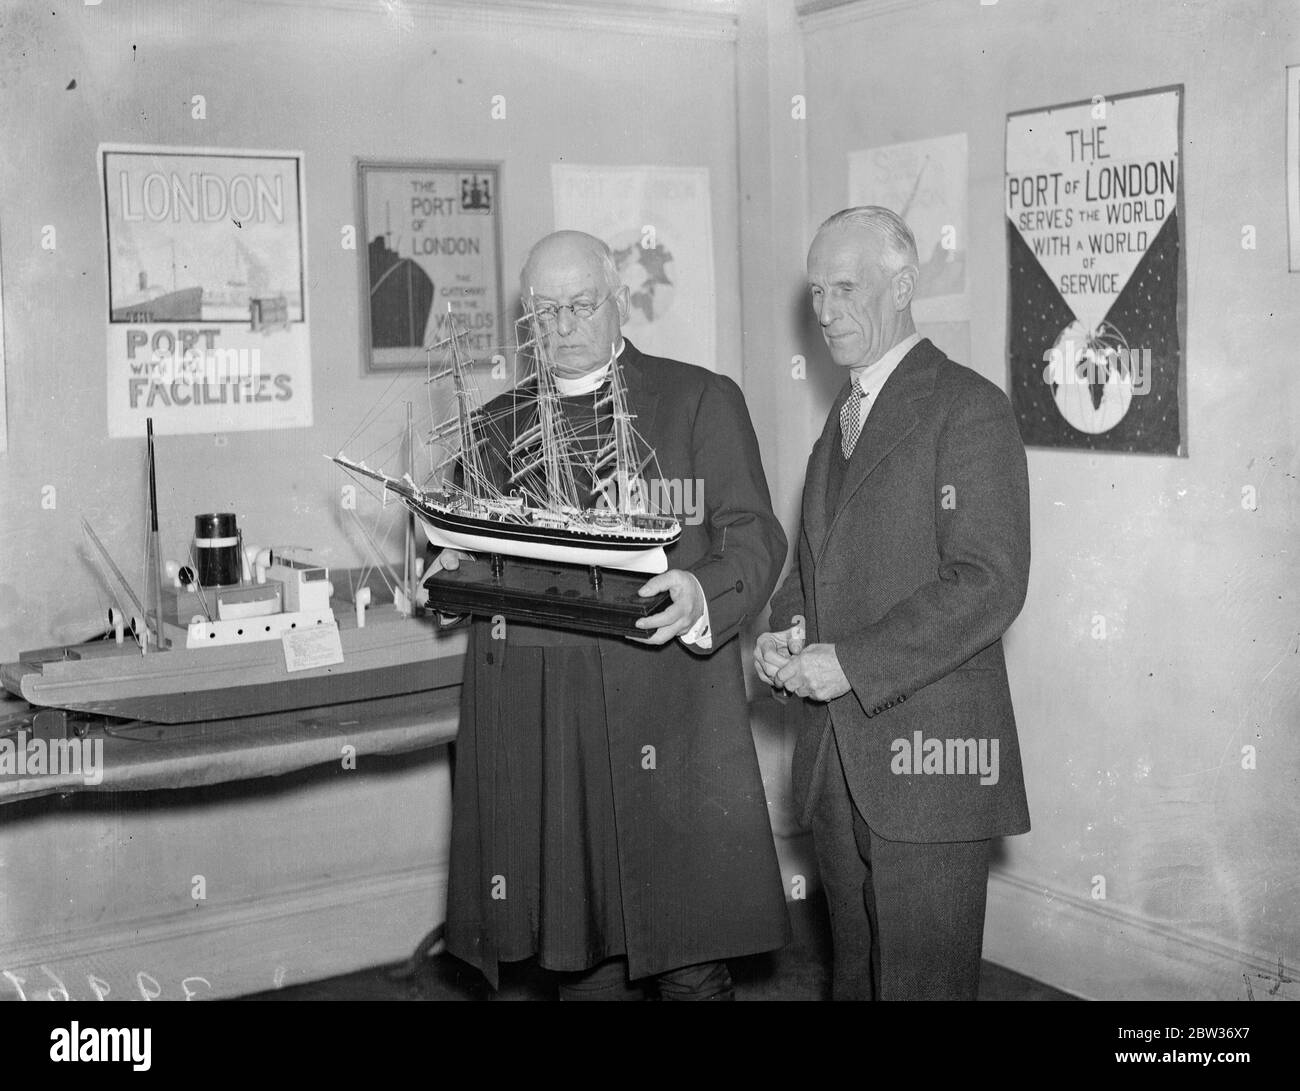 Dean of Westminster opens Port of London Authority art exhibition . The Dean of Westminster , Dr Foxley Norris who is himself a well - known artist , opened the annual Port of Lord Authority art exhibition at the Authority ' s headquarters in Trinity Square . Photo shows ; The Dean of Westminster inspecting a model ship with Lord Ritchie , Chairman of the Port of London Authority after opening the exhibition . 29 November 1933 Stock Photo